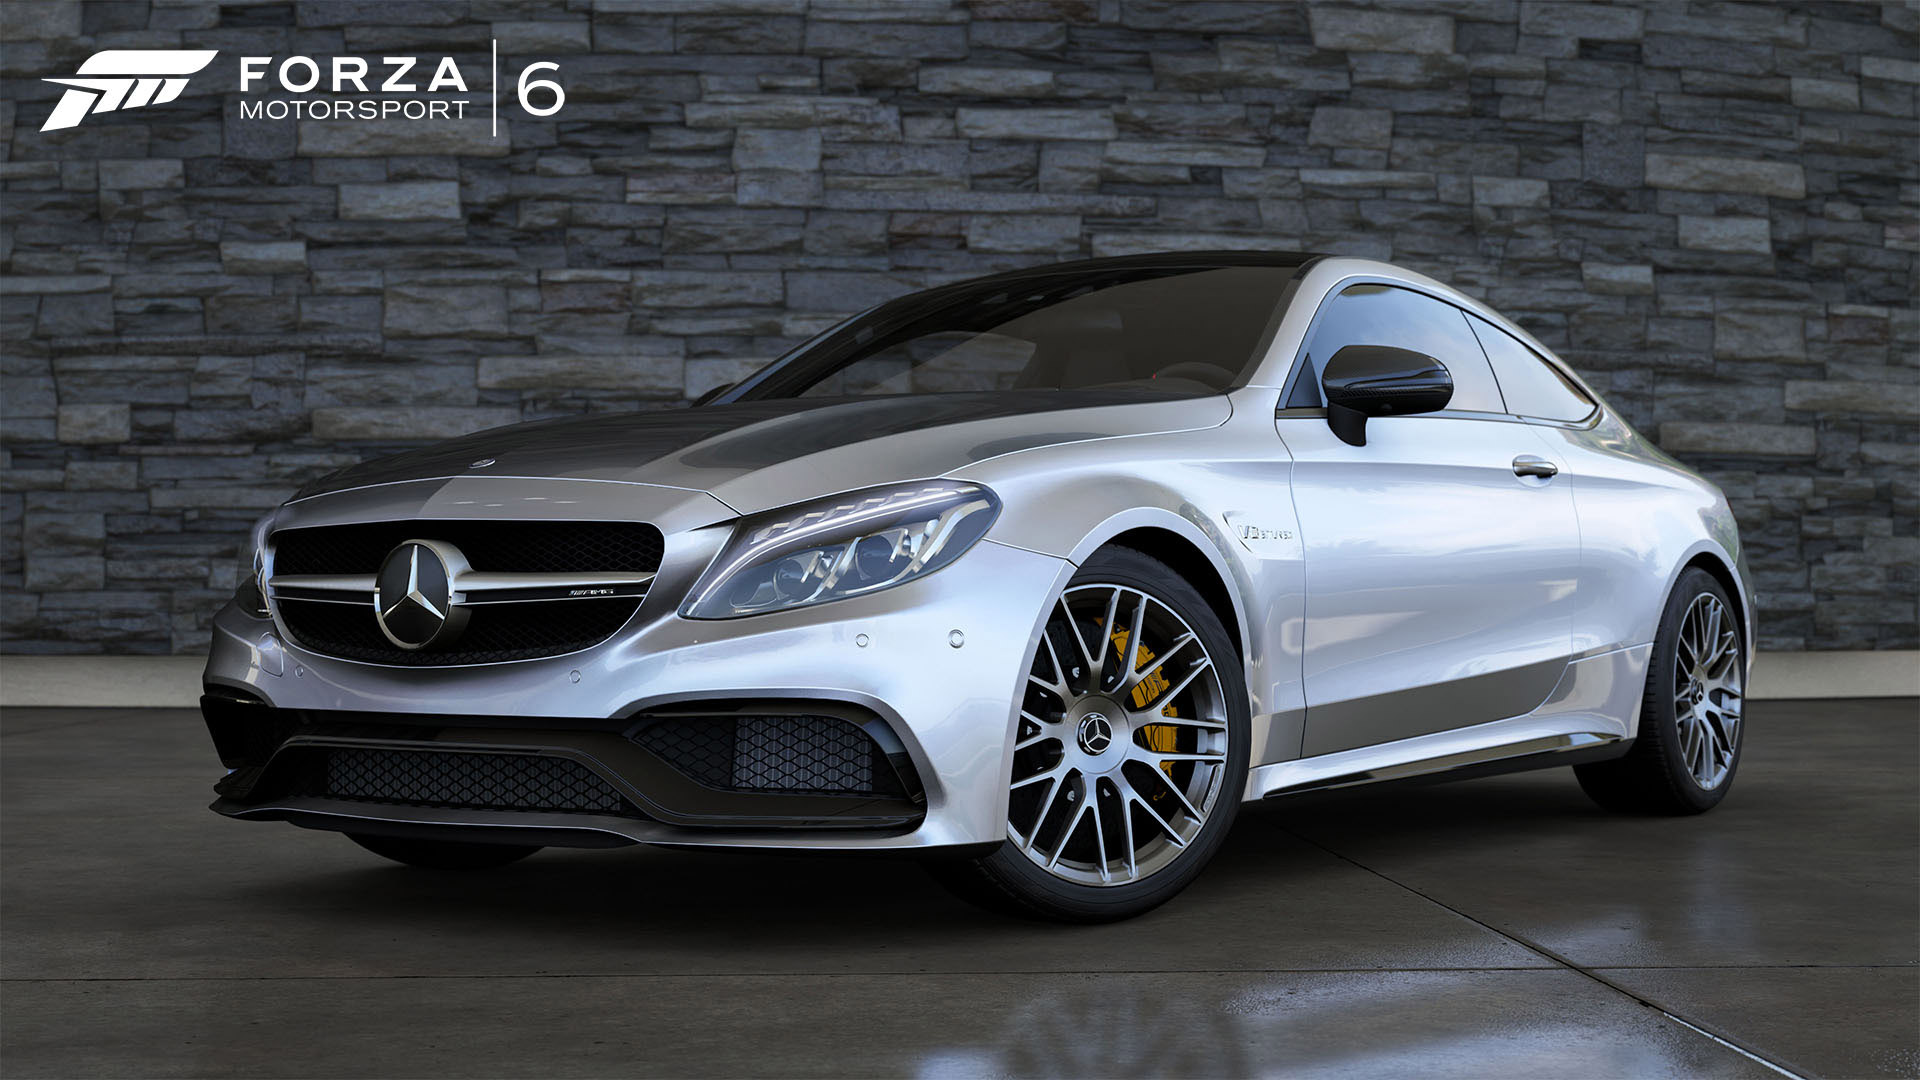 Mercedes-AMG C63 S Coupe for Forza Motorsport 6